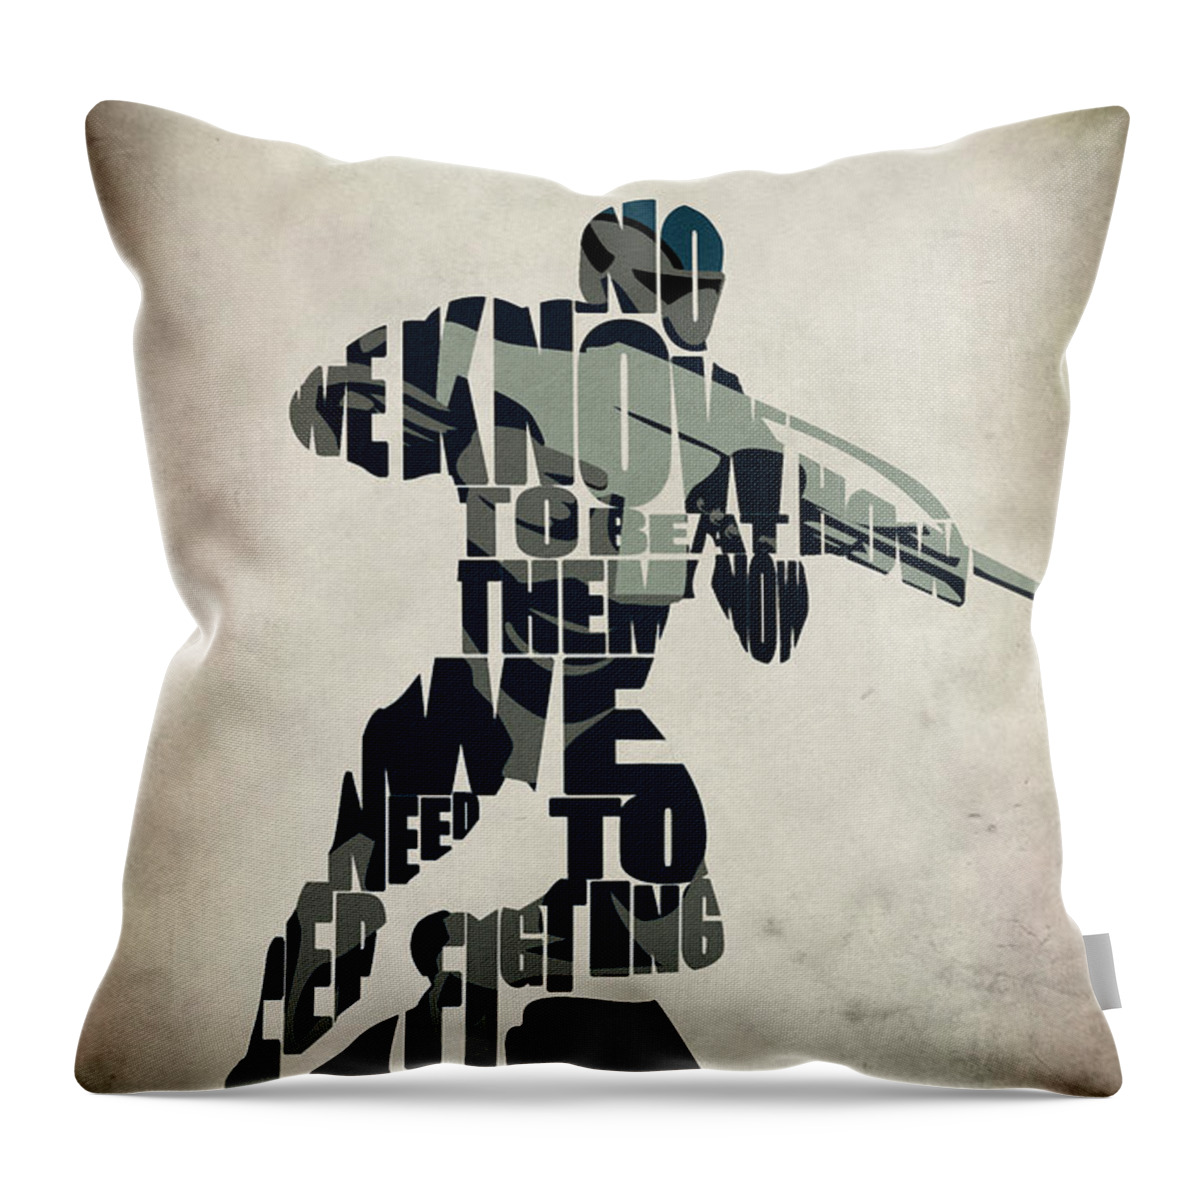 Jake Nomad Dunn Throw Pillow featuring the digital art Jake Nomad Dunn by Inspirowl Design